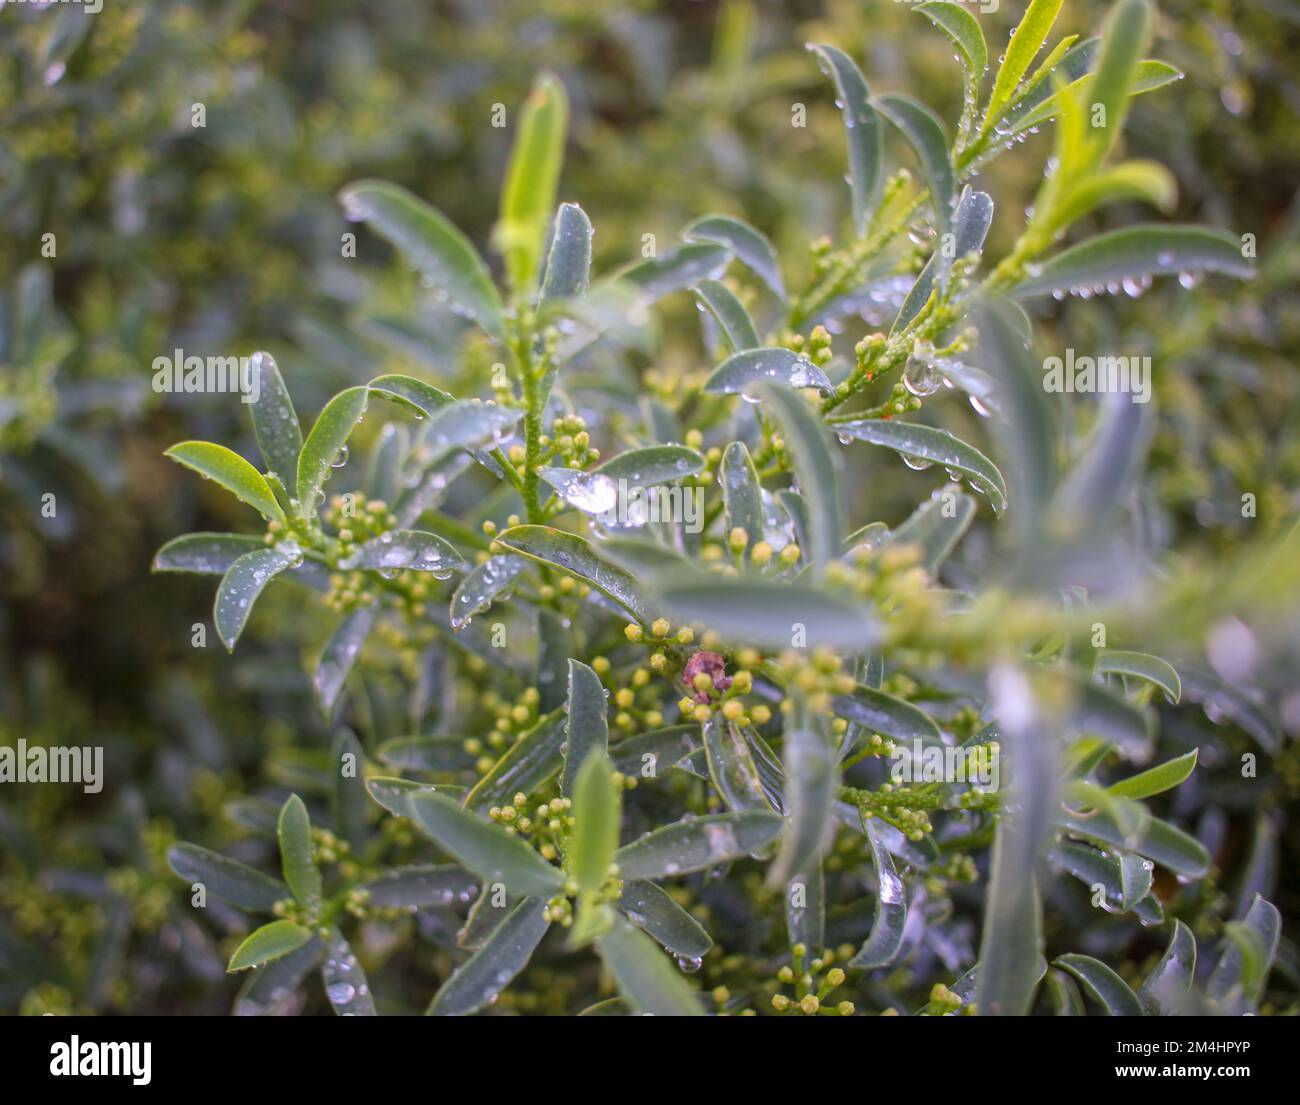 drops of water on plants after rain Stock Photo